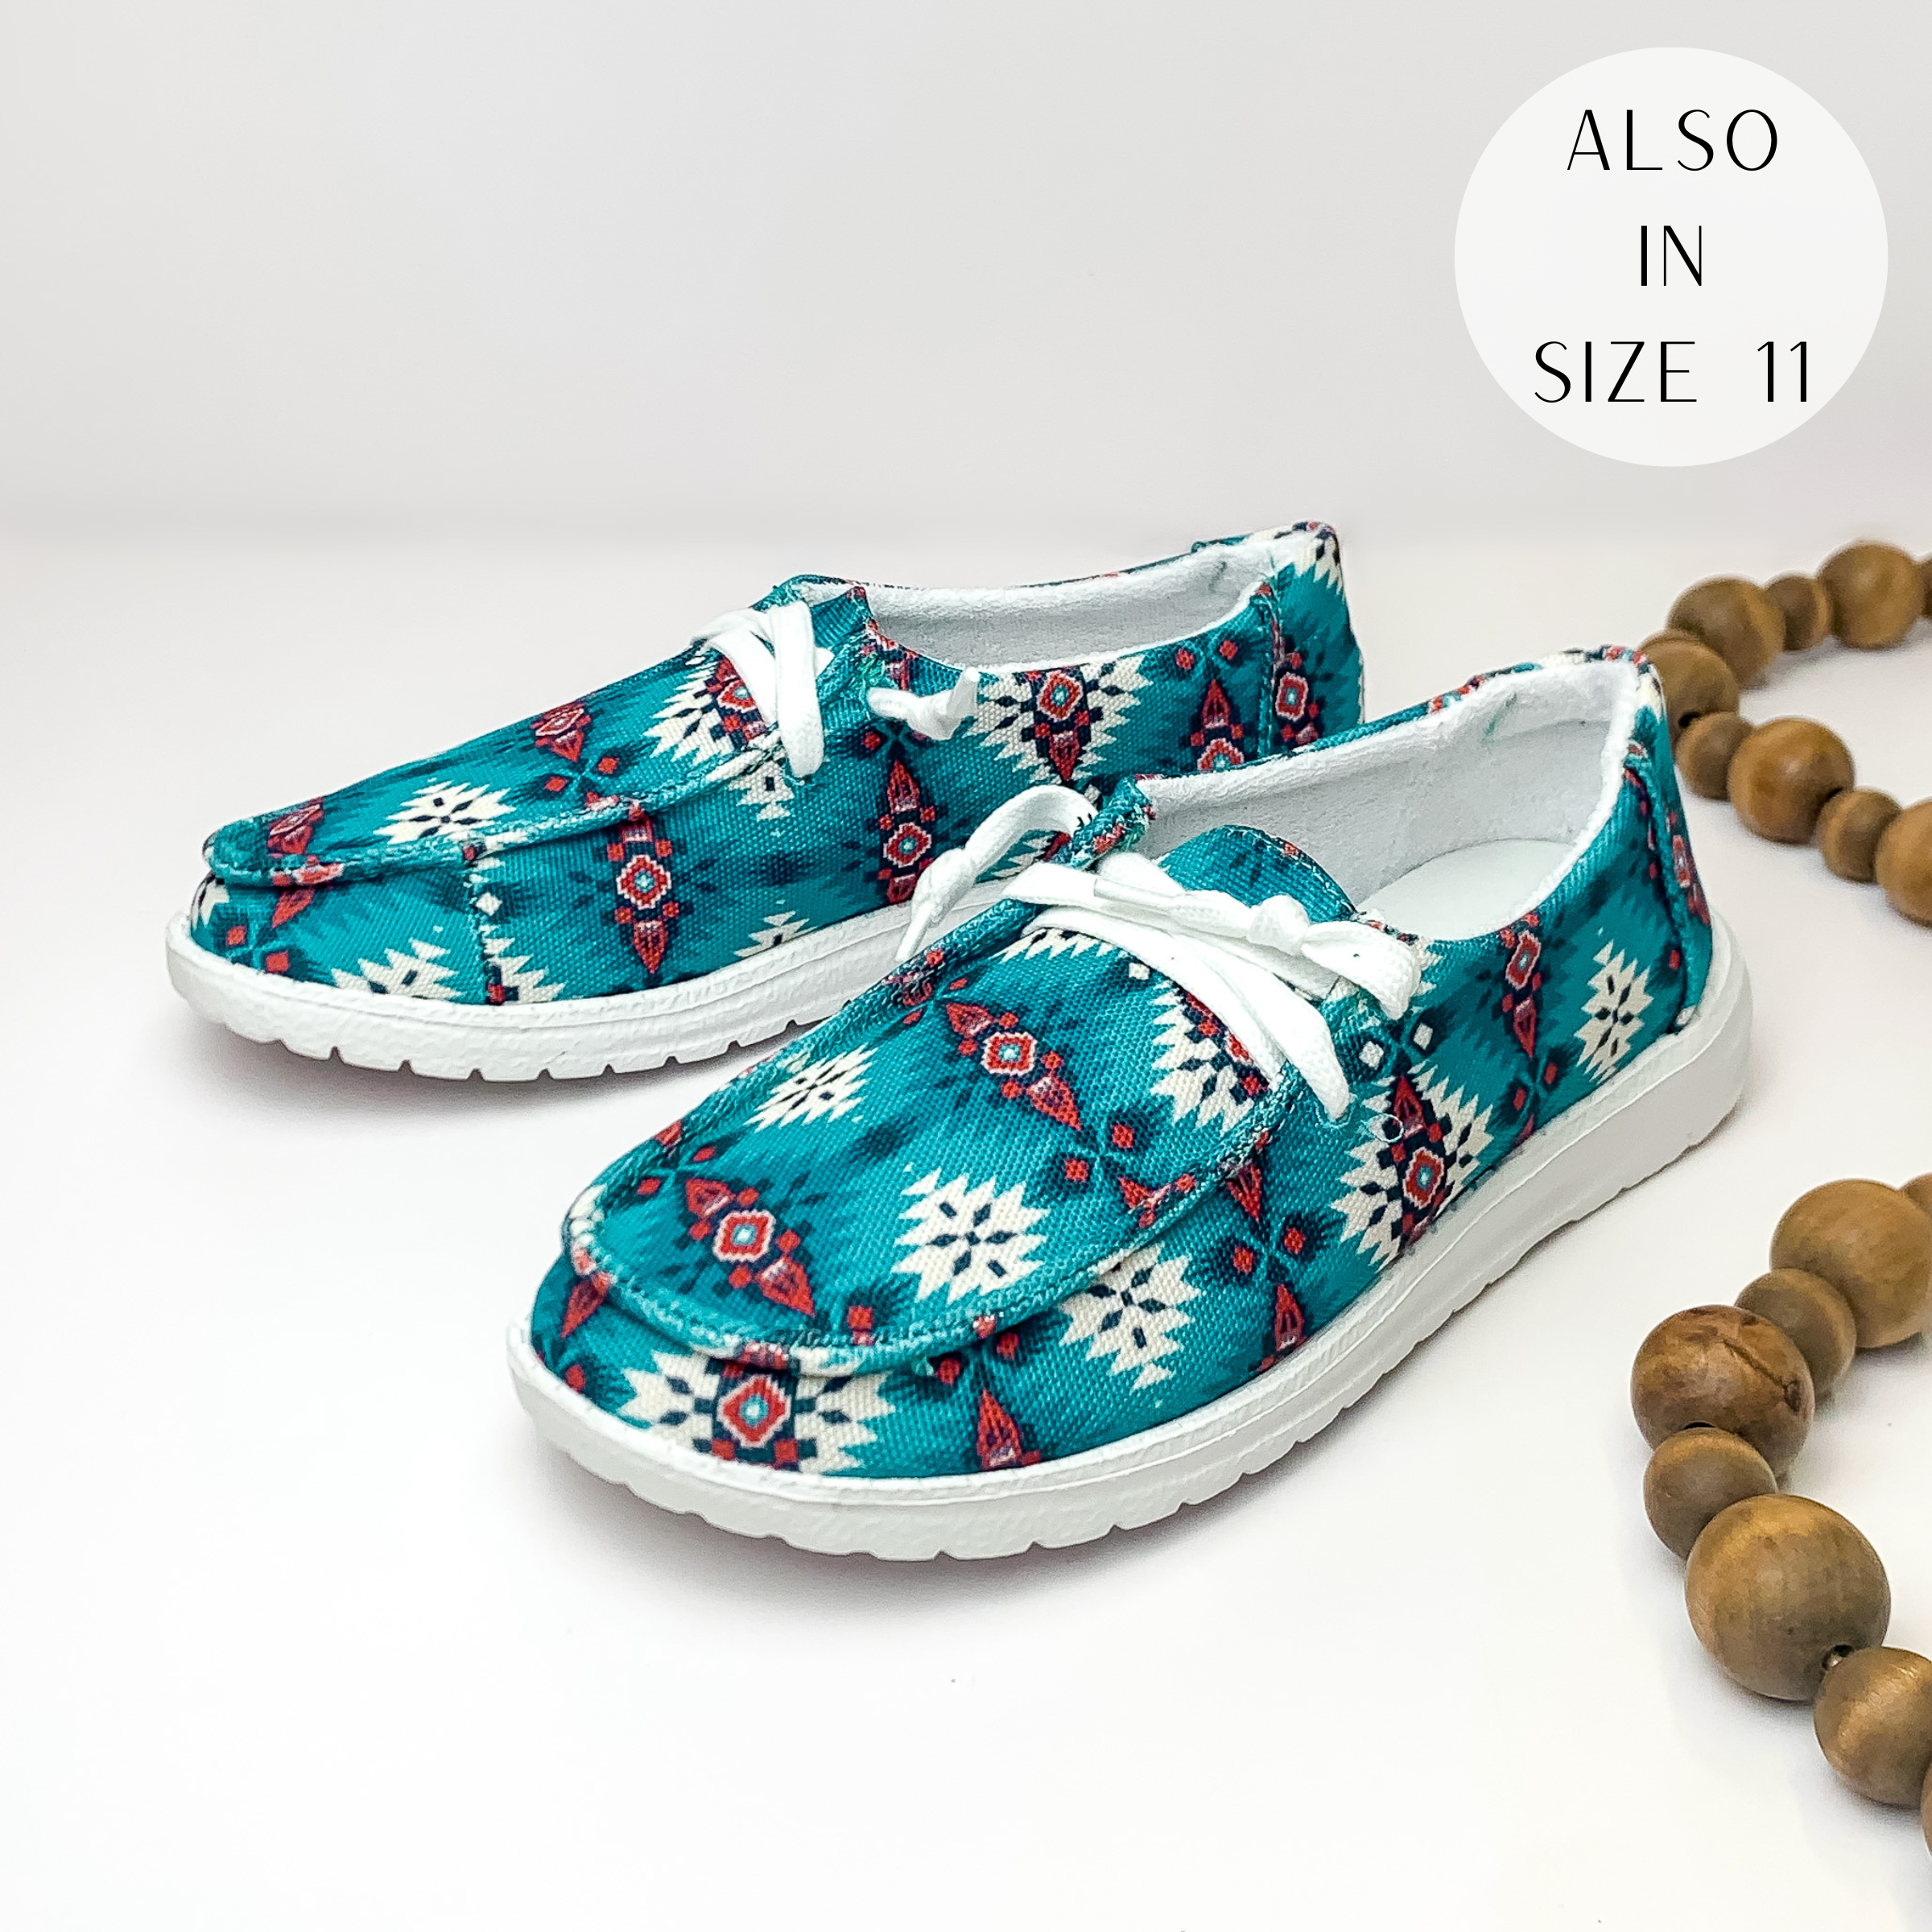 Blue shoes with a blue, white, and red aztec print and white laces. These shoes are pictured on a white background with brown beads on the right side.